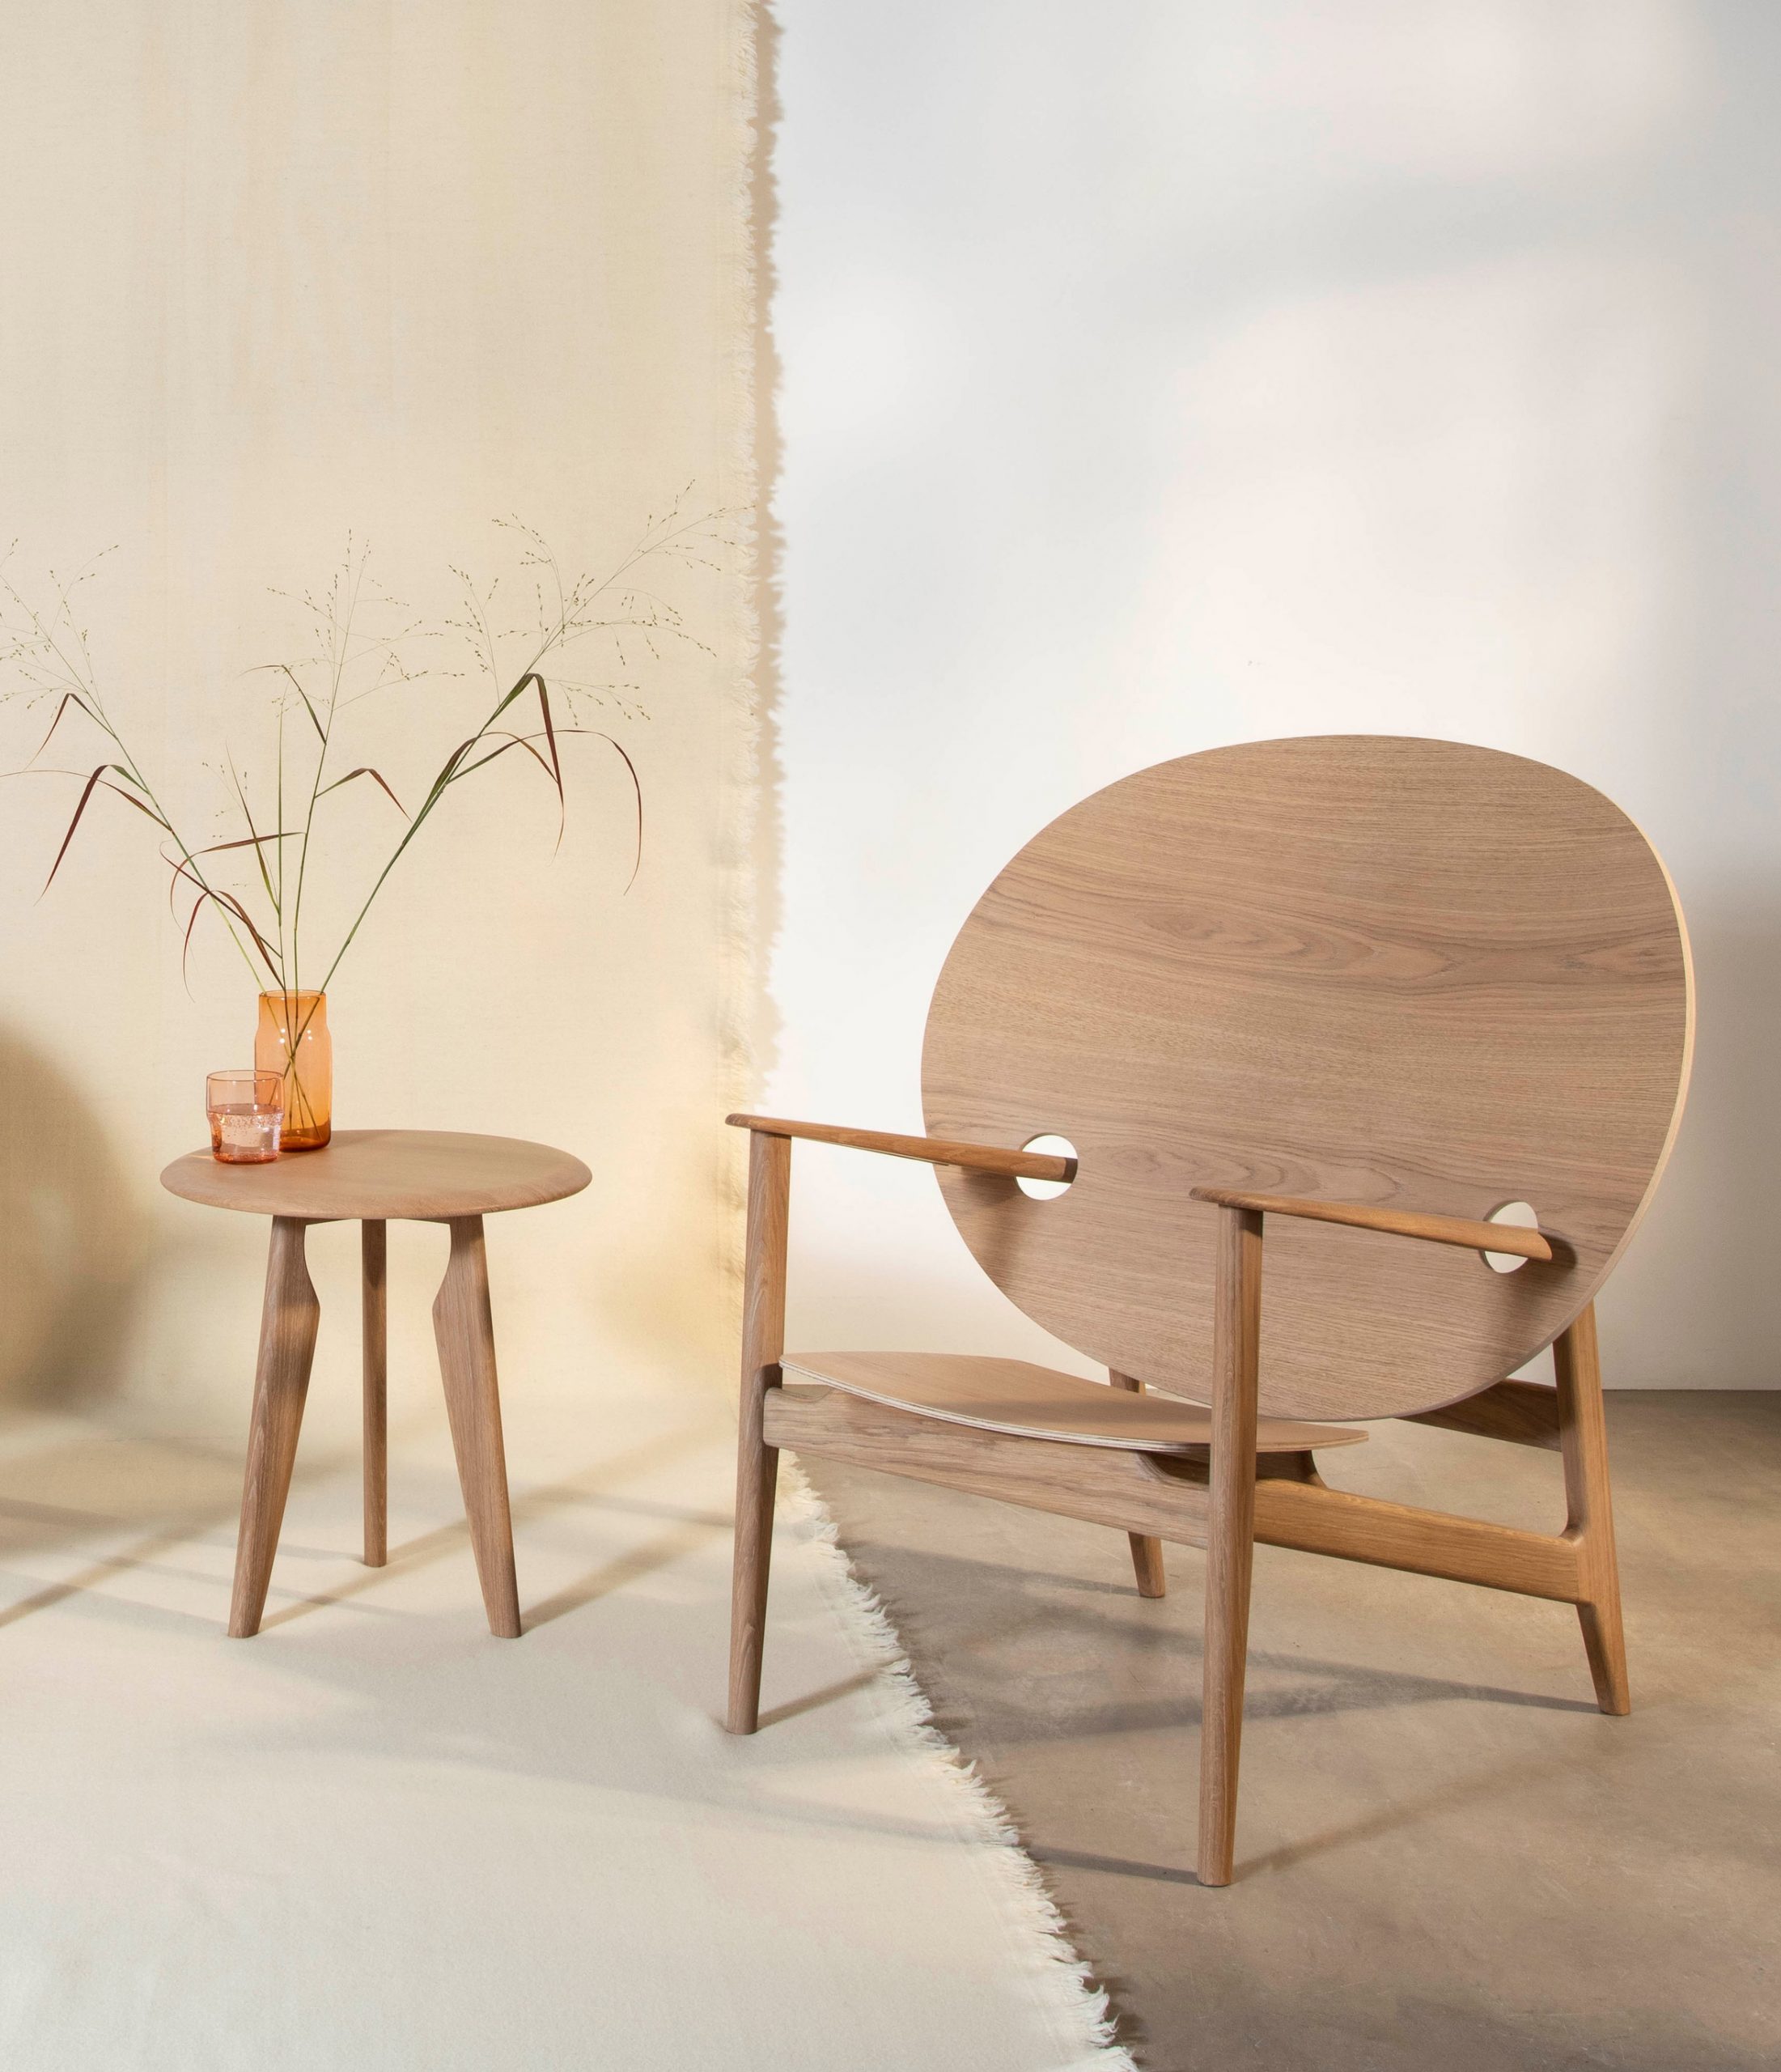 Iklwa chair and table by Mac Collins for Benchmark